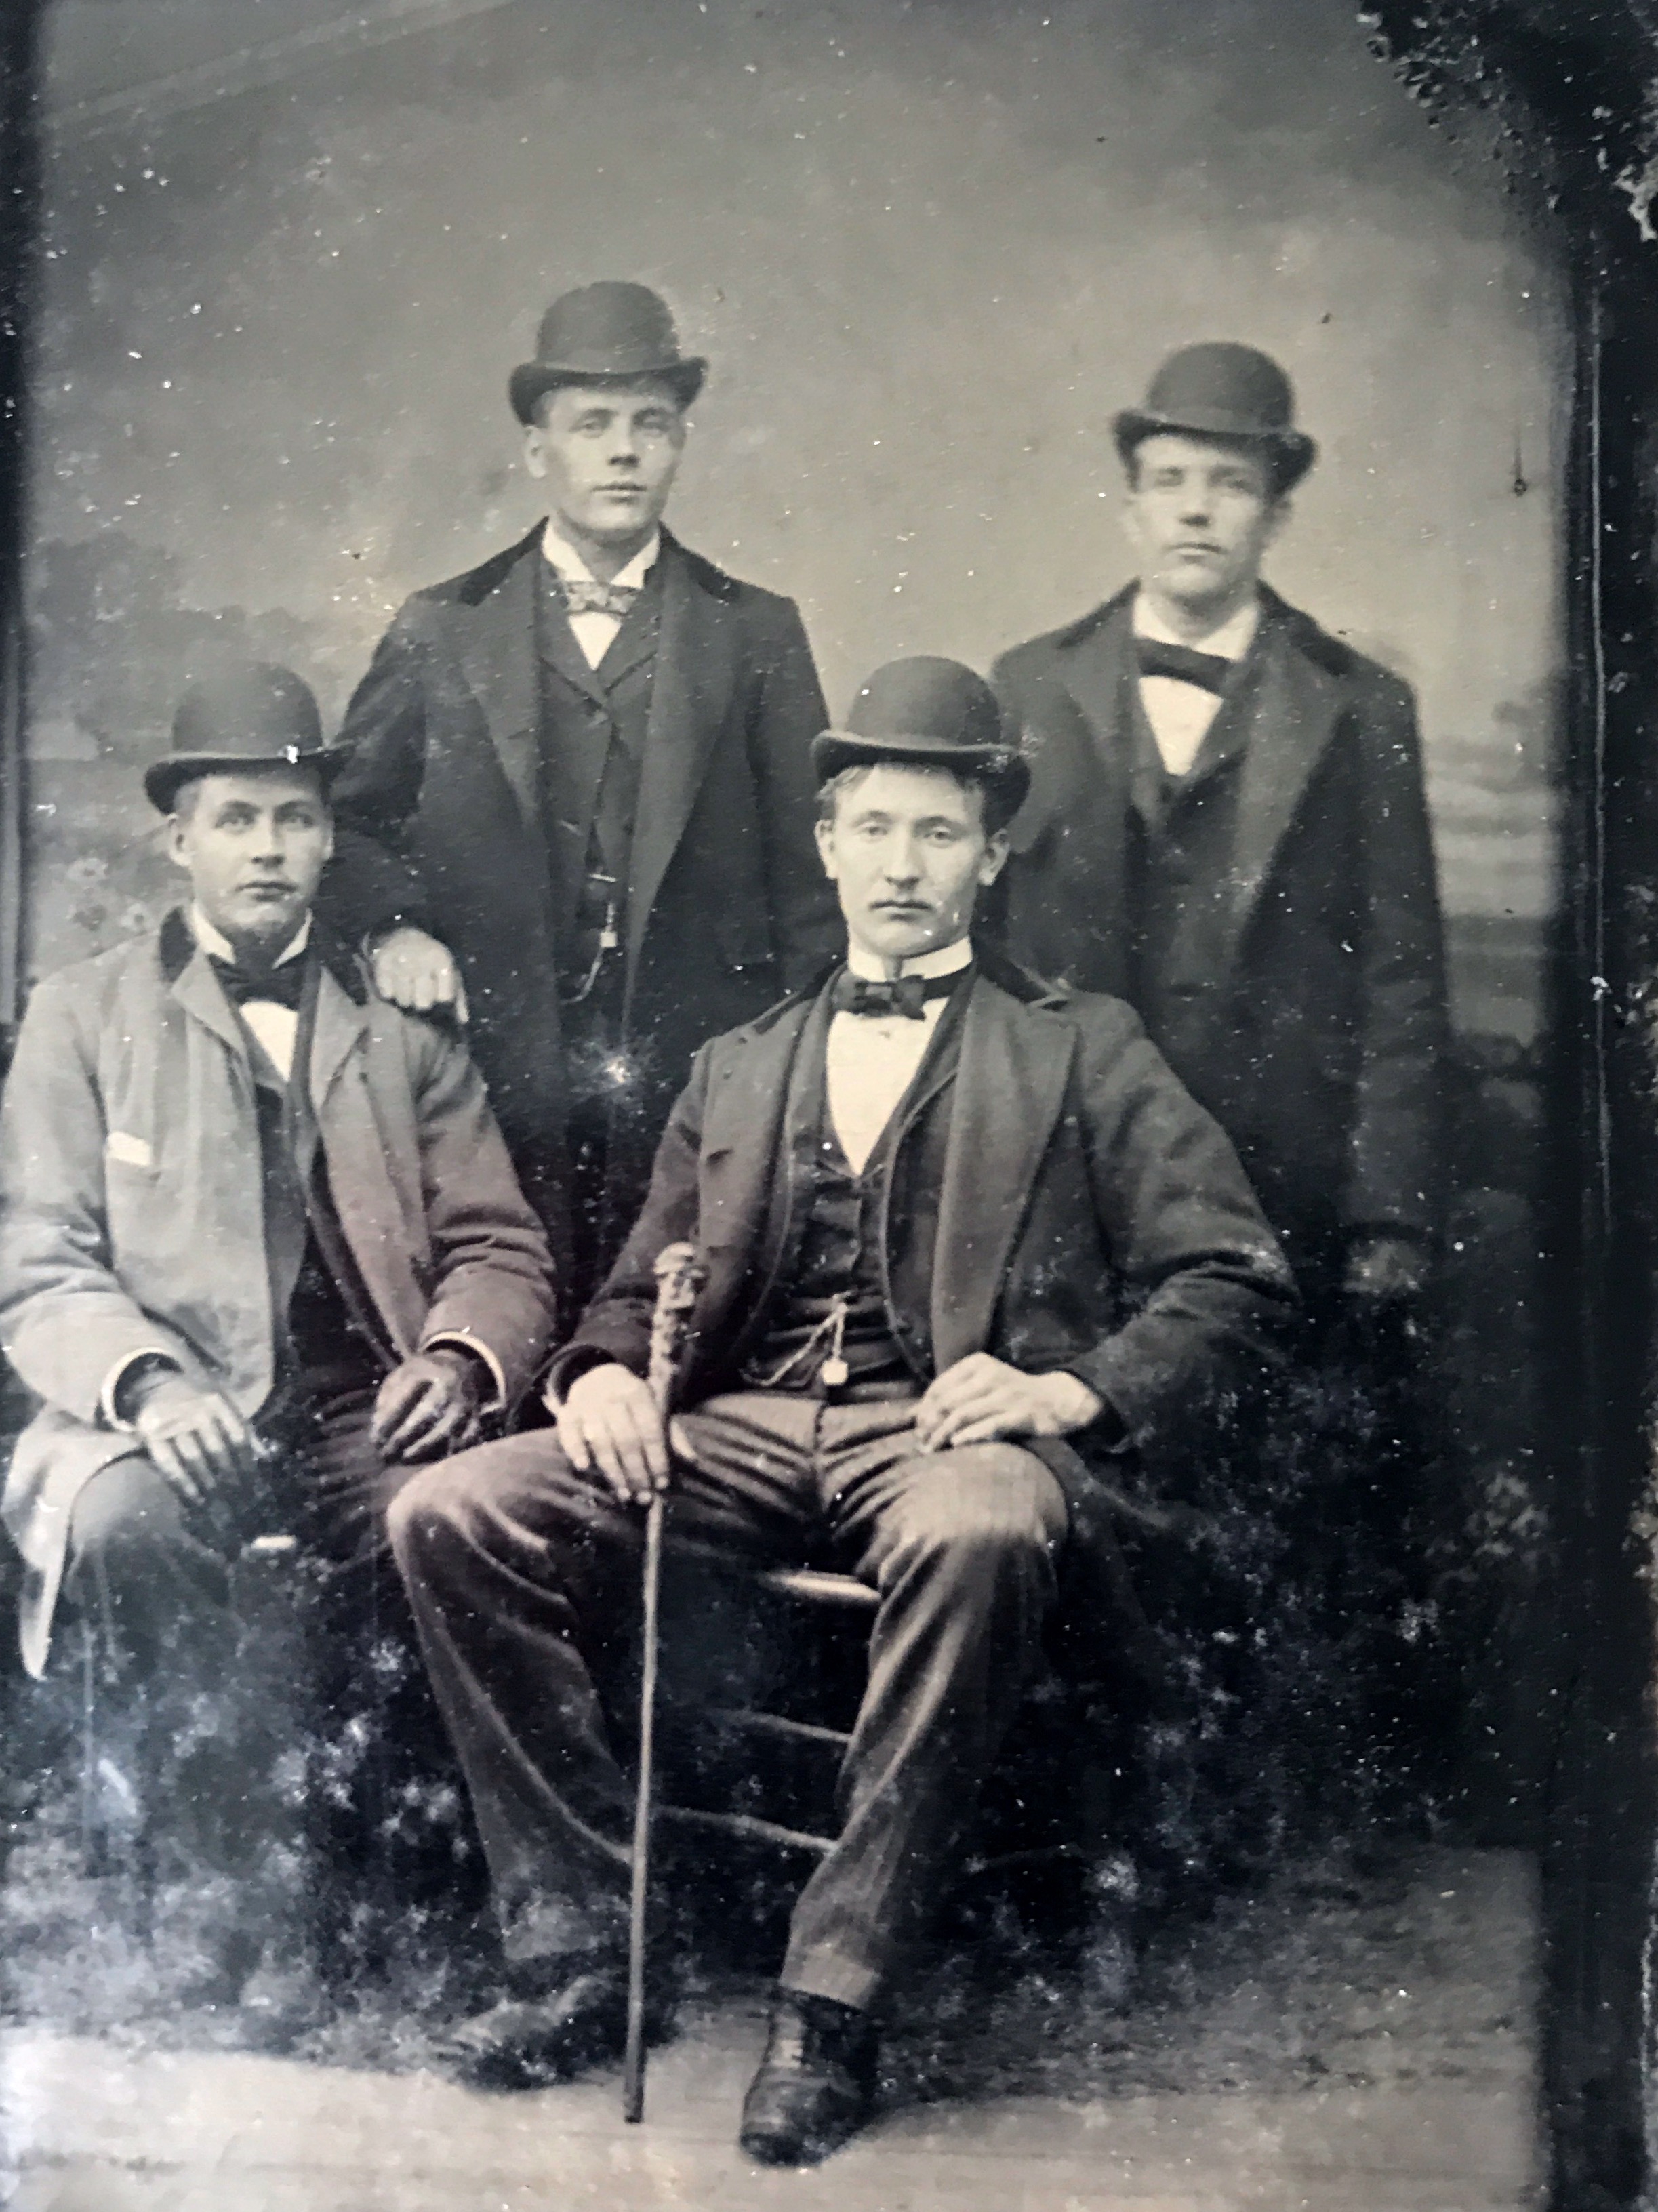 Standing Chas Nic Rydell and biker friend/colleague  Louie Knapp, seated Chas' brother Erik and friend Per Hemmingsson, Brooklyn 1895